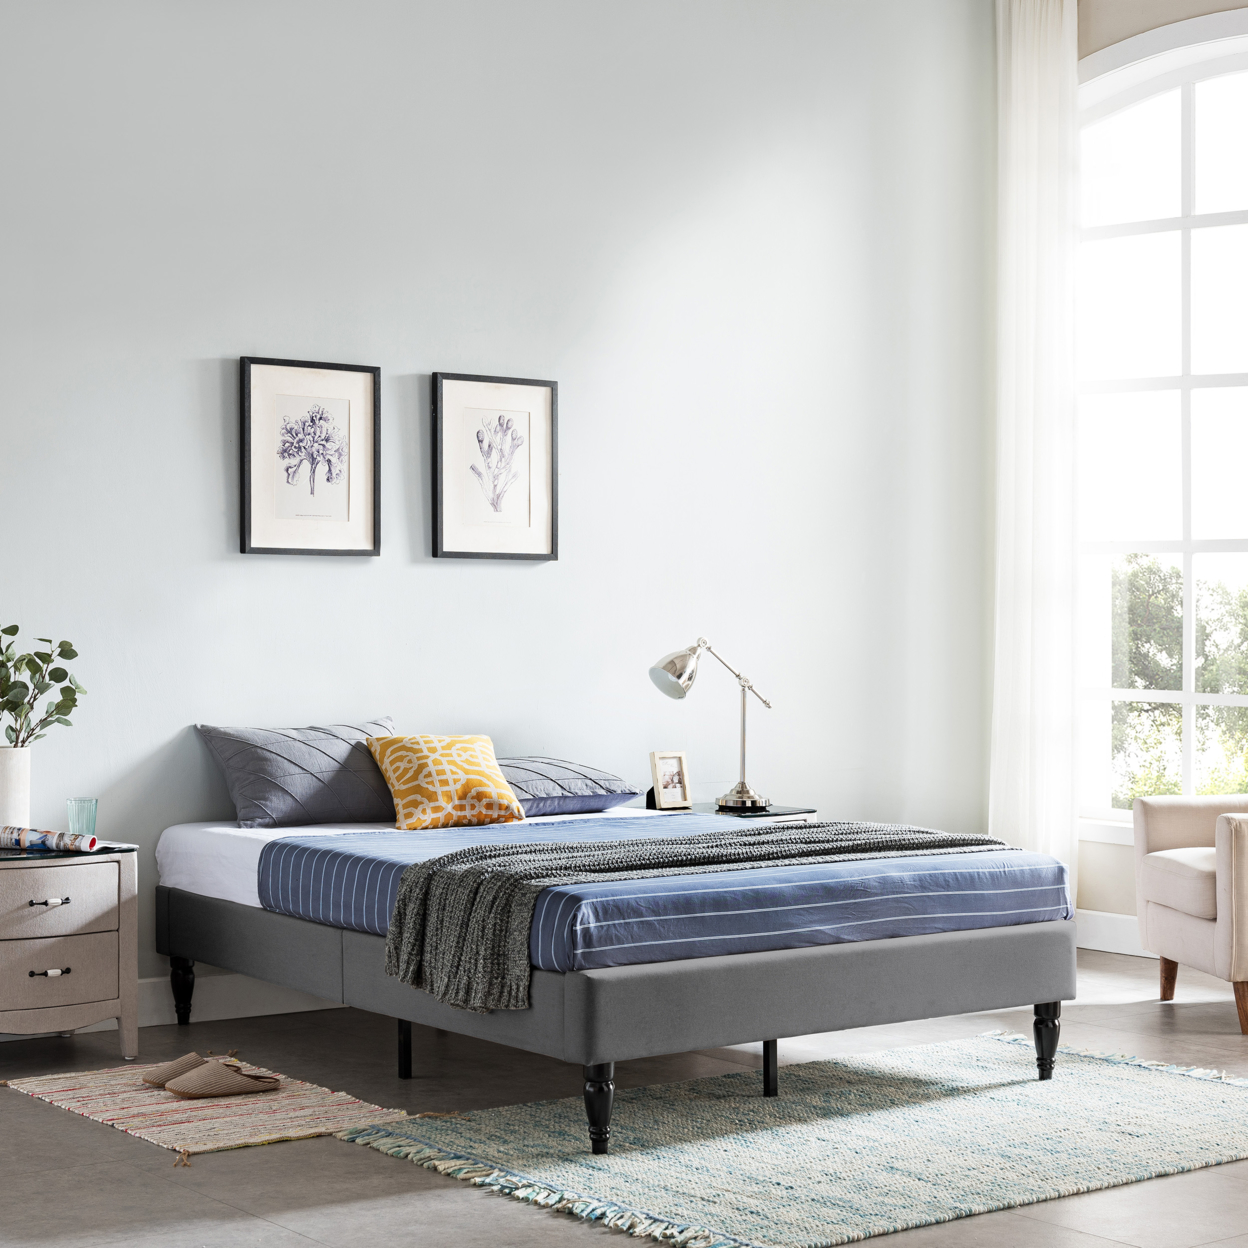 Luca Contemporary Upholstered Queen Bed Frame With Turned Legs - Charcoal Gray